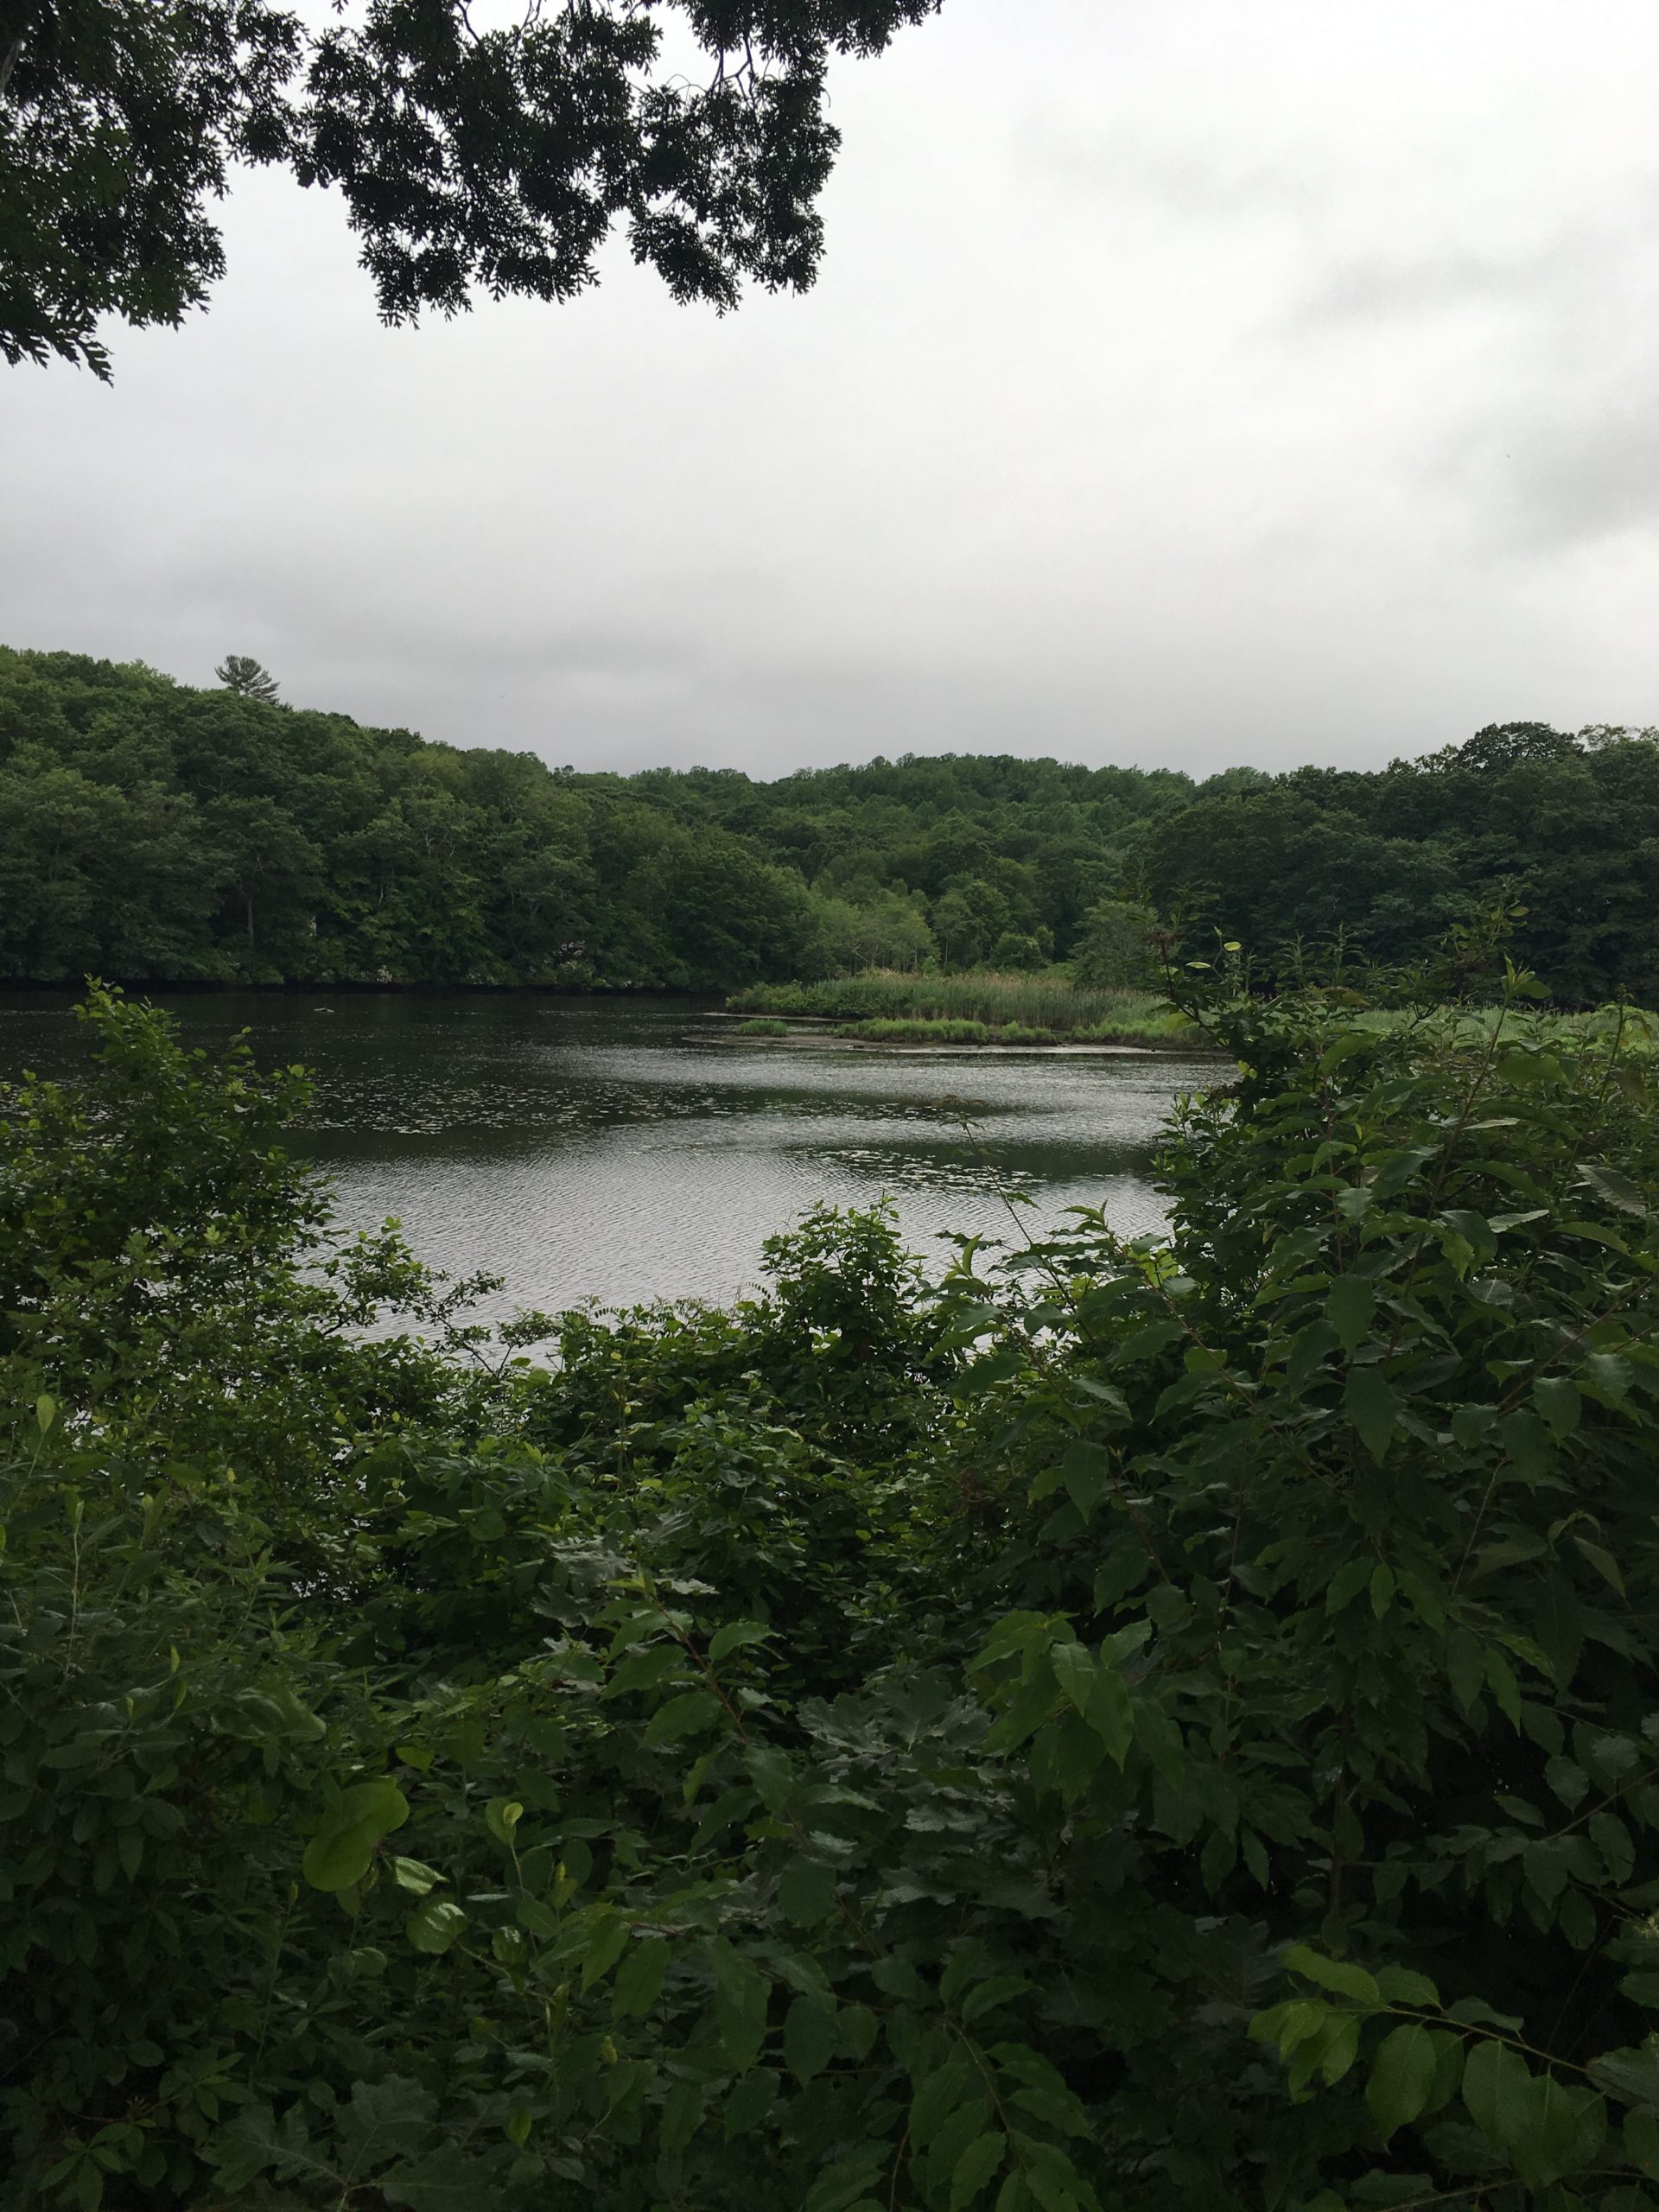 Connecticut River Estuary at Lord Cove.